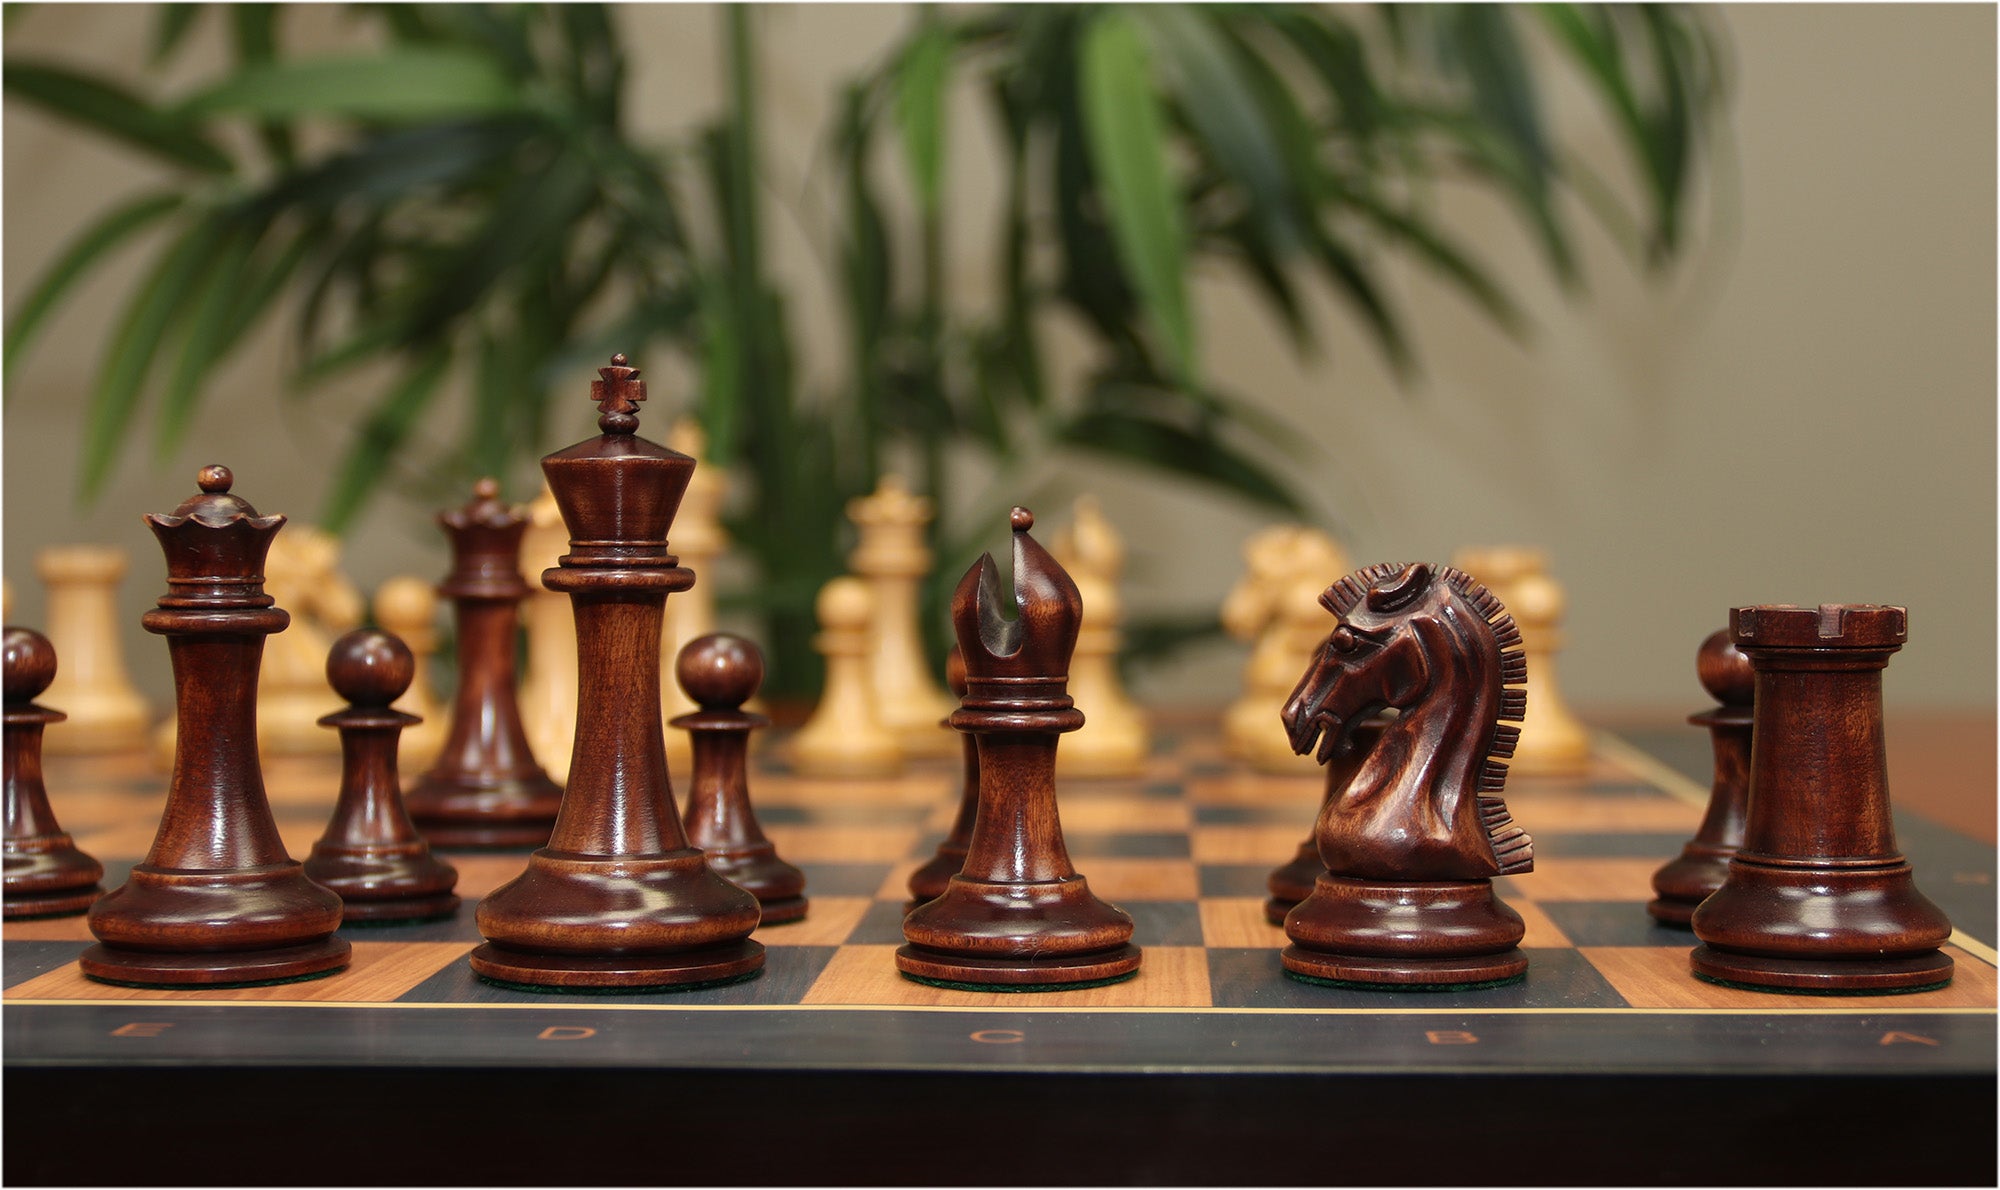 Commemorative Signature Series 3.625" Staunton Chessmen by MANDEEP SAGGU in Non-Antiqued/ Mahogany Stained Boxwood